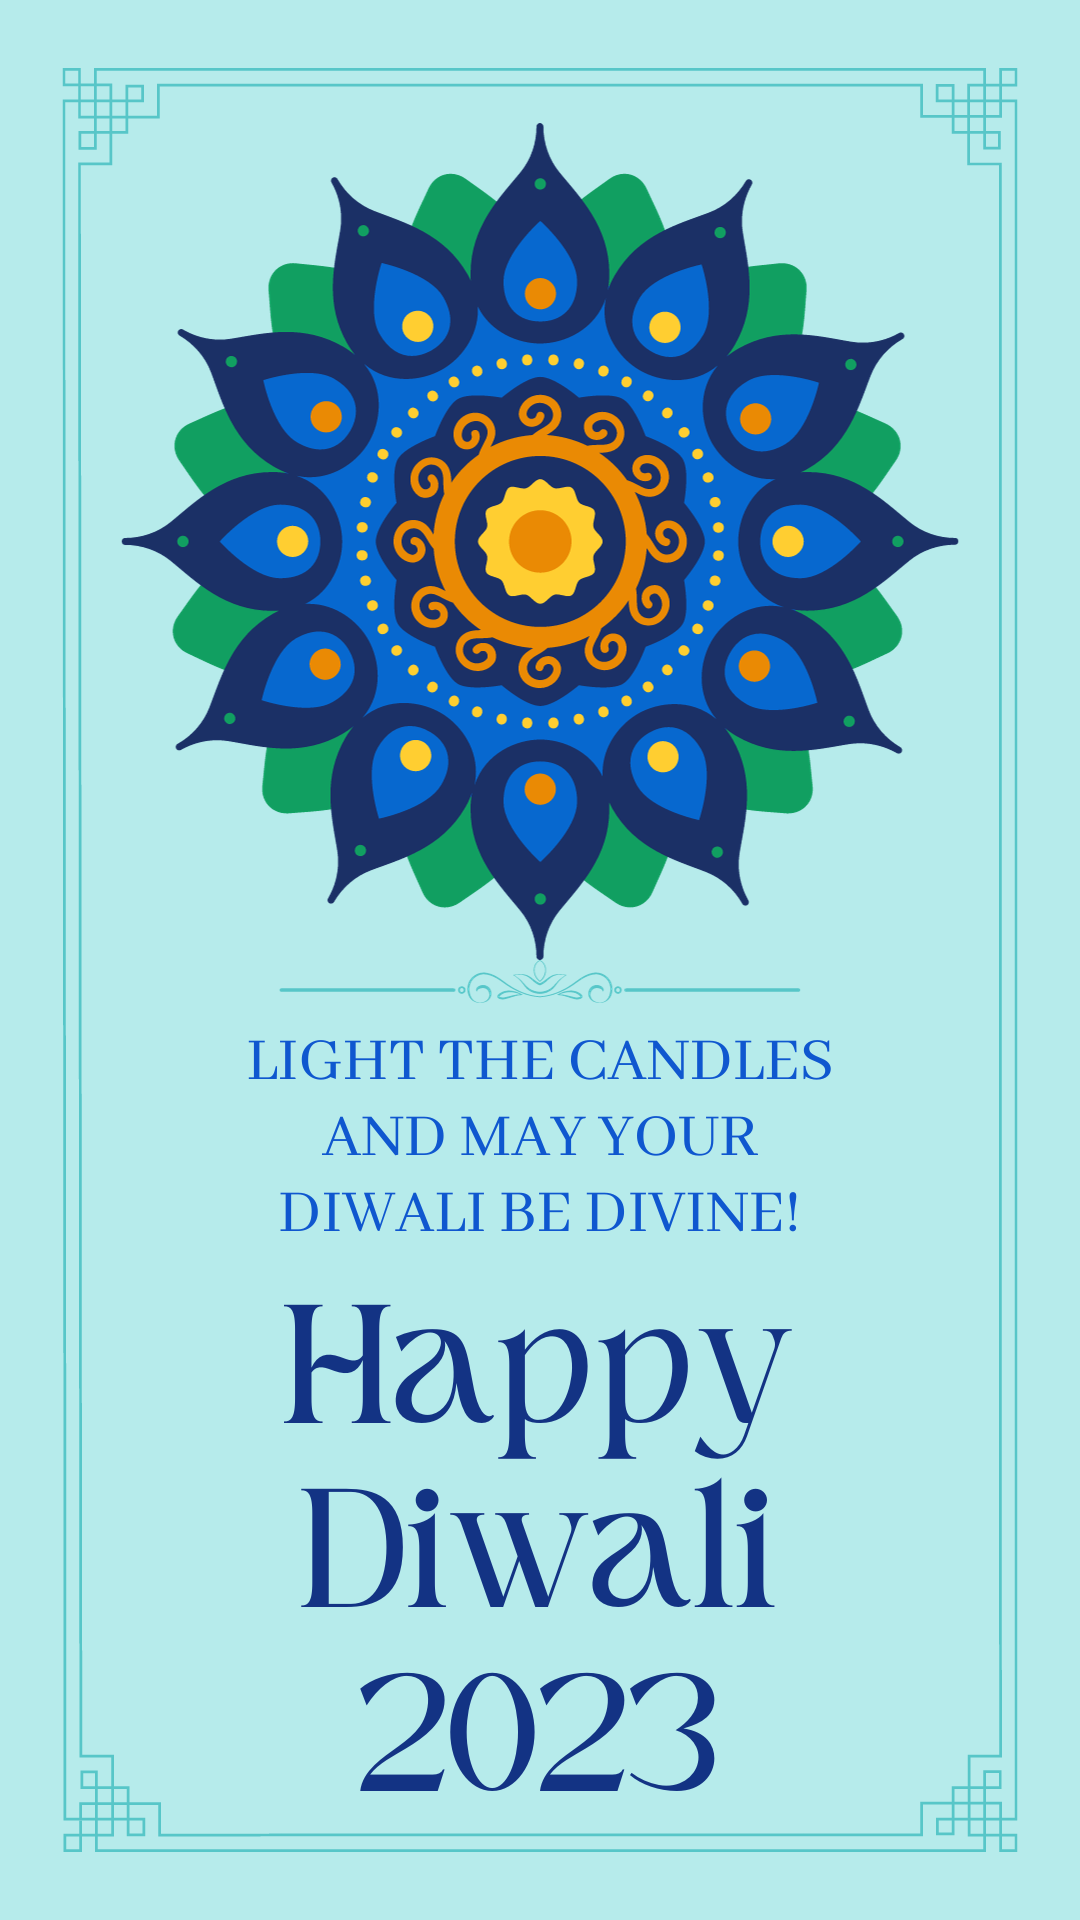 #{"id":221,"_id":"61f3f785e0f744570541c10c","name":"happy-diwali-status","count":9,"data":"{\"_id\":{\"$oid\":\"61f3f785e0f744570541c10c\"},\"id\":\"195\",\"name\":\"happy-diwali-status\",\"created_at\":\"2020-11-07-17:56:11\",\"updated_at\":\"2020-11-07-17:56:11\",\"updatedAt\":{\"$date\":\"2022-01-28T14:33:44.889Z\"},\"count\":9}","deleted_at":null,"created_at":"2020-11-07T05:56:11.000000Z","updated_at":"2020-11-07T05:56:11.000000Z","merge_with":null,"pivot":{"taggable_id":2384,"tag_id":221,"taggable_type":"App\\Models\\Status"}}, #{"id":222,"_id":"61f3f785e0f744570541c10d","name":"diwali-wishes","count":35,"data":"{\"_id\":{\"$oid\":\"61f3f785e0f744570541c10d\"},\"id\":\"196\",\"name\":\"diwali-wishes\",\"created_at\":\"2020-11-07-17:56:11\",\"updated_at\":\"2020-11-07-17:56:11\",\"updatedAt\":{\"$date\":\"2022-01-28T14:33:44.889Z\"},\"count\":35}","deleted_at":null,"created_at":"2020-11-07T05:56:11.000000Z","updated_at":"2020-11-07T05:56:11.000000Z","merge_with":null,"pivot":{"taggable_id":2384,"tag_id":222,"taggable_type":"App\\Models\\Status"}}, #{"id":2578,"_id":null,"name":"happy-diwali-quotes","count":0,"data":null,"deleted_at":null,"created_at":"2023-09-17T05:39:53.000000Z","updated_at":"2023-09-17T05:39:53.000000Z","merge_with":null,"pivot":{"taggable_id":2384,"tag_id":2578,"taggable_type":"App\\Models\\Status"}}, #{"id":690,"_id":"61f3f785e0f744570541c4d5","name":"happy-diwali","count":14,"data":"{\"_id\":{\"$oid\":\"61f3f785e0f744570541c4d5\"},\"id\":\"1164\",\"name\":\"happy-diwali\",\"created_at\":\"2021-10-27-13:51:23\",\"updated_at\":\"2021-10-27-13:51:23\",\"updatedAt\":{\"$date\":\"2022-01-28T14:33:44.945Z\"},\"count\":14}","deleted_at":null,"created_at":"2021-10-27T01:51:23.000000Z","updated_at":"2021-10-27T01:51:23.000000Z","merge_with":null,"pivot":{"taggable_id":2384,"tag_id":690,"taggable_type":"App\\Models\\Status"}}, #{"id":2579,"_id":null,"name":"happy-diwali-pictures","count":0,"data":null,"deleted_at":null,"created_at":"2023-09-17T05:39:53.000000Z","updated_at":"2023-09-17T05:39:53.000000Z","merge_with":null,"pivot":{"taggable_id":2384,"tag_id":2579,"taggable_type":"App\\Models\\Status"}}, #{"id":2580,"_id":null,"name":"happy-diwali-2023","count":0,"data":null,"deleted_at":null,"created_at":"2023-09-17T05:39:53.000000Z","updated_at":"2023-09-17T05:39:53.000000Z","merge_with":null,"pivot":{"taggable_id":2384,"tag_id":2580,"taggable_type":"App\\Models\\Status"}}, #{"id":698,"_id":"61f3f785e0f744570541c4dd","name":"shubh-diwali","count":3,"data":"{\"_id\":{\"$oid\":\"61f3f785e0f744570541c4dd\"},\"id\":\"1172\",\"name\":\"shubh-diwali\",\"created_at\":\"2021-10-27-14:03:34\",\"updated_at\":\"2021-10-27-14:03:34\",\"updatedAt\":{\"$date\":\"2022-01-28T14:33:44.944Z\"},\"count\":3}","deleted_at":null,"created_at":"2021-10-27T02:03:34.000000Z","updated_at":"2021-10-27T02:03:34.000000Z","merge_with":null,"pivot":{"taggable_id":2384,"tag_id":698,"taggable_type":"App\\Models\\Status"}}